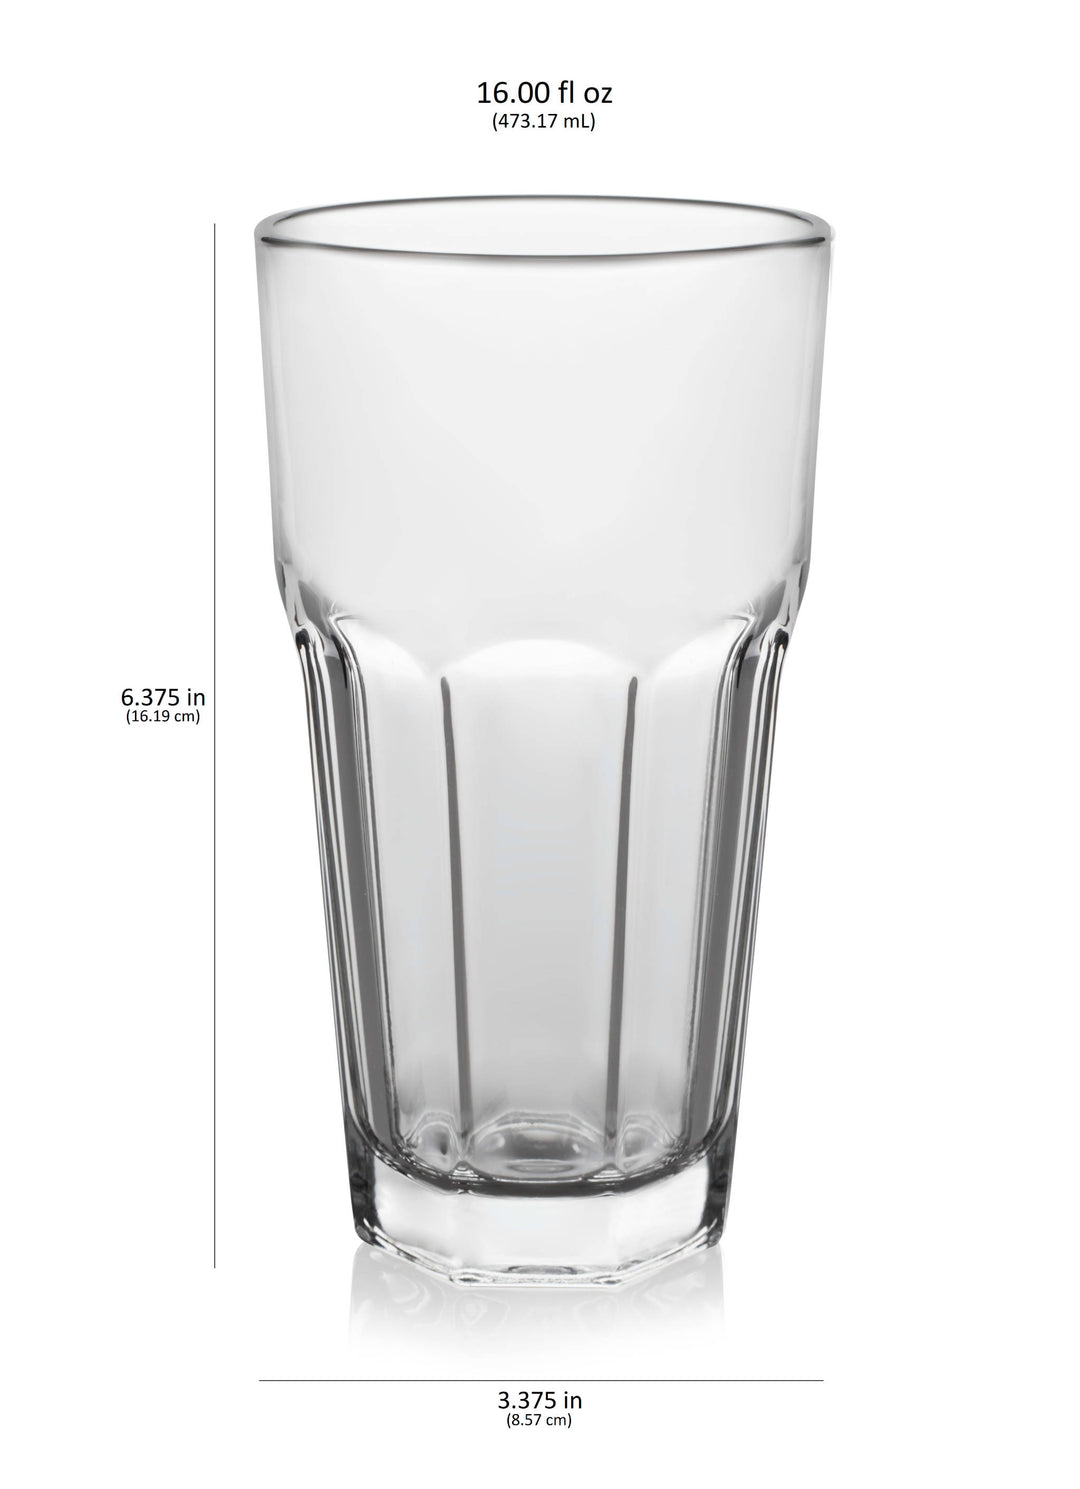 Includes 12, 16-ounce tumbler glasses (3.4-inch diameter by 6.4-inch height)